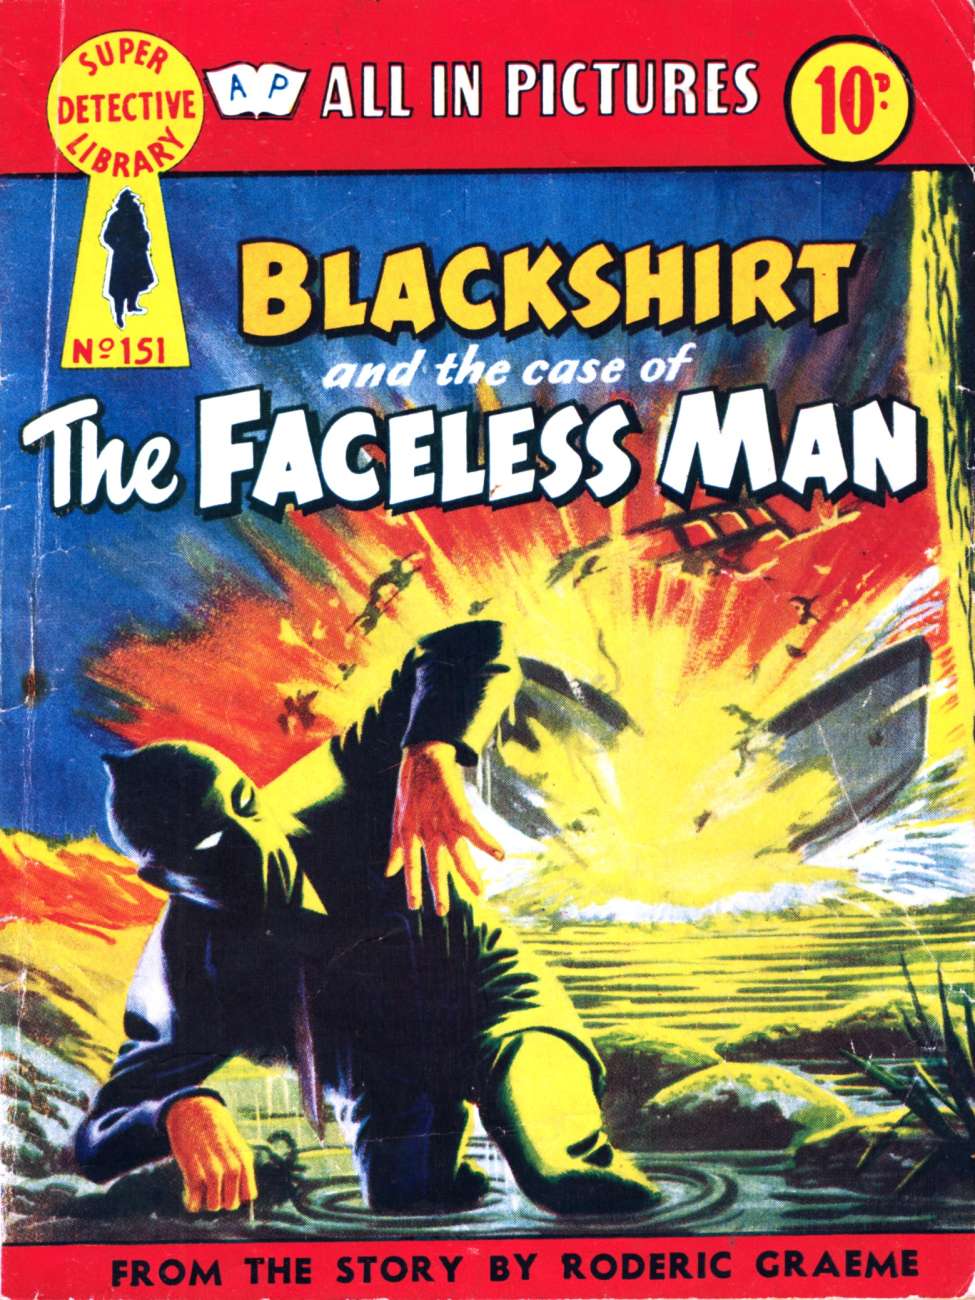 Book Cover For Super Detective Library 151 - Blackshirt -The Faceless Man